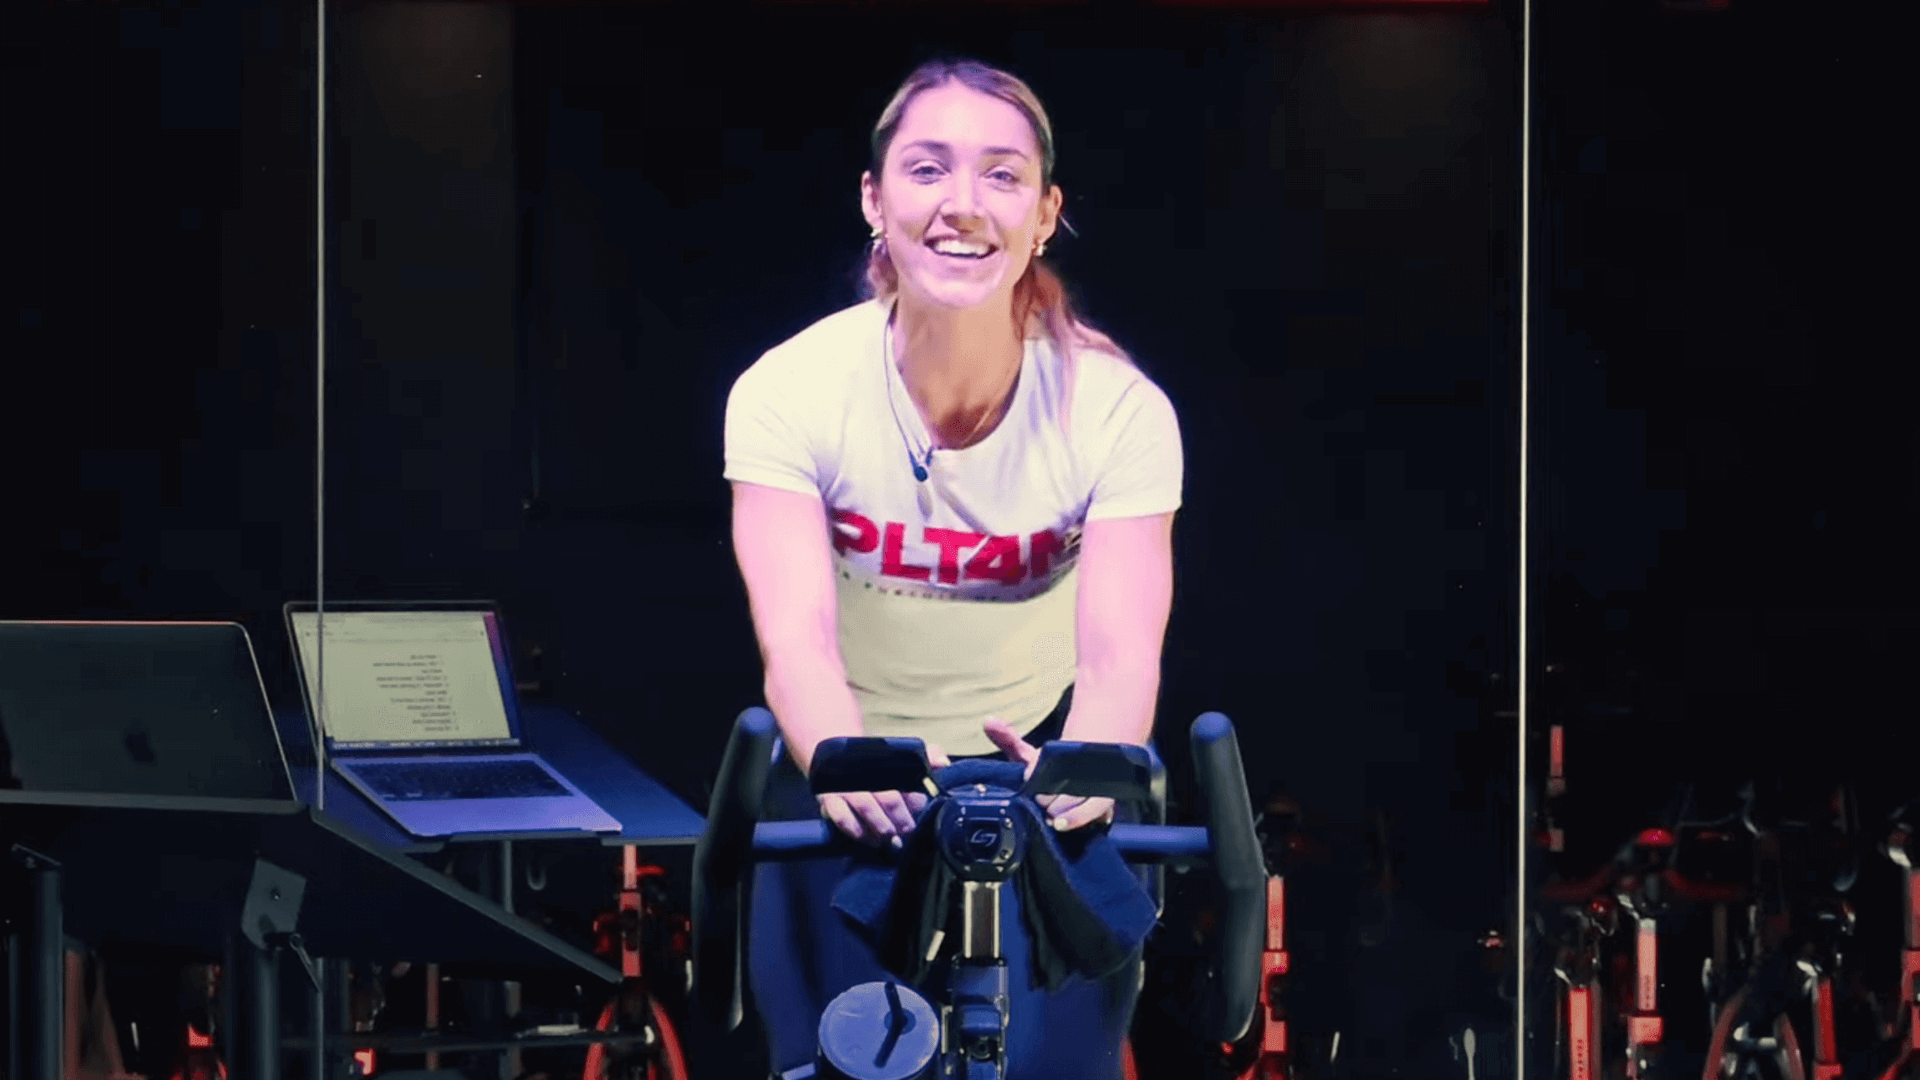 Spin bike workouts for beginners instructor Marguerite Lee on bike.